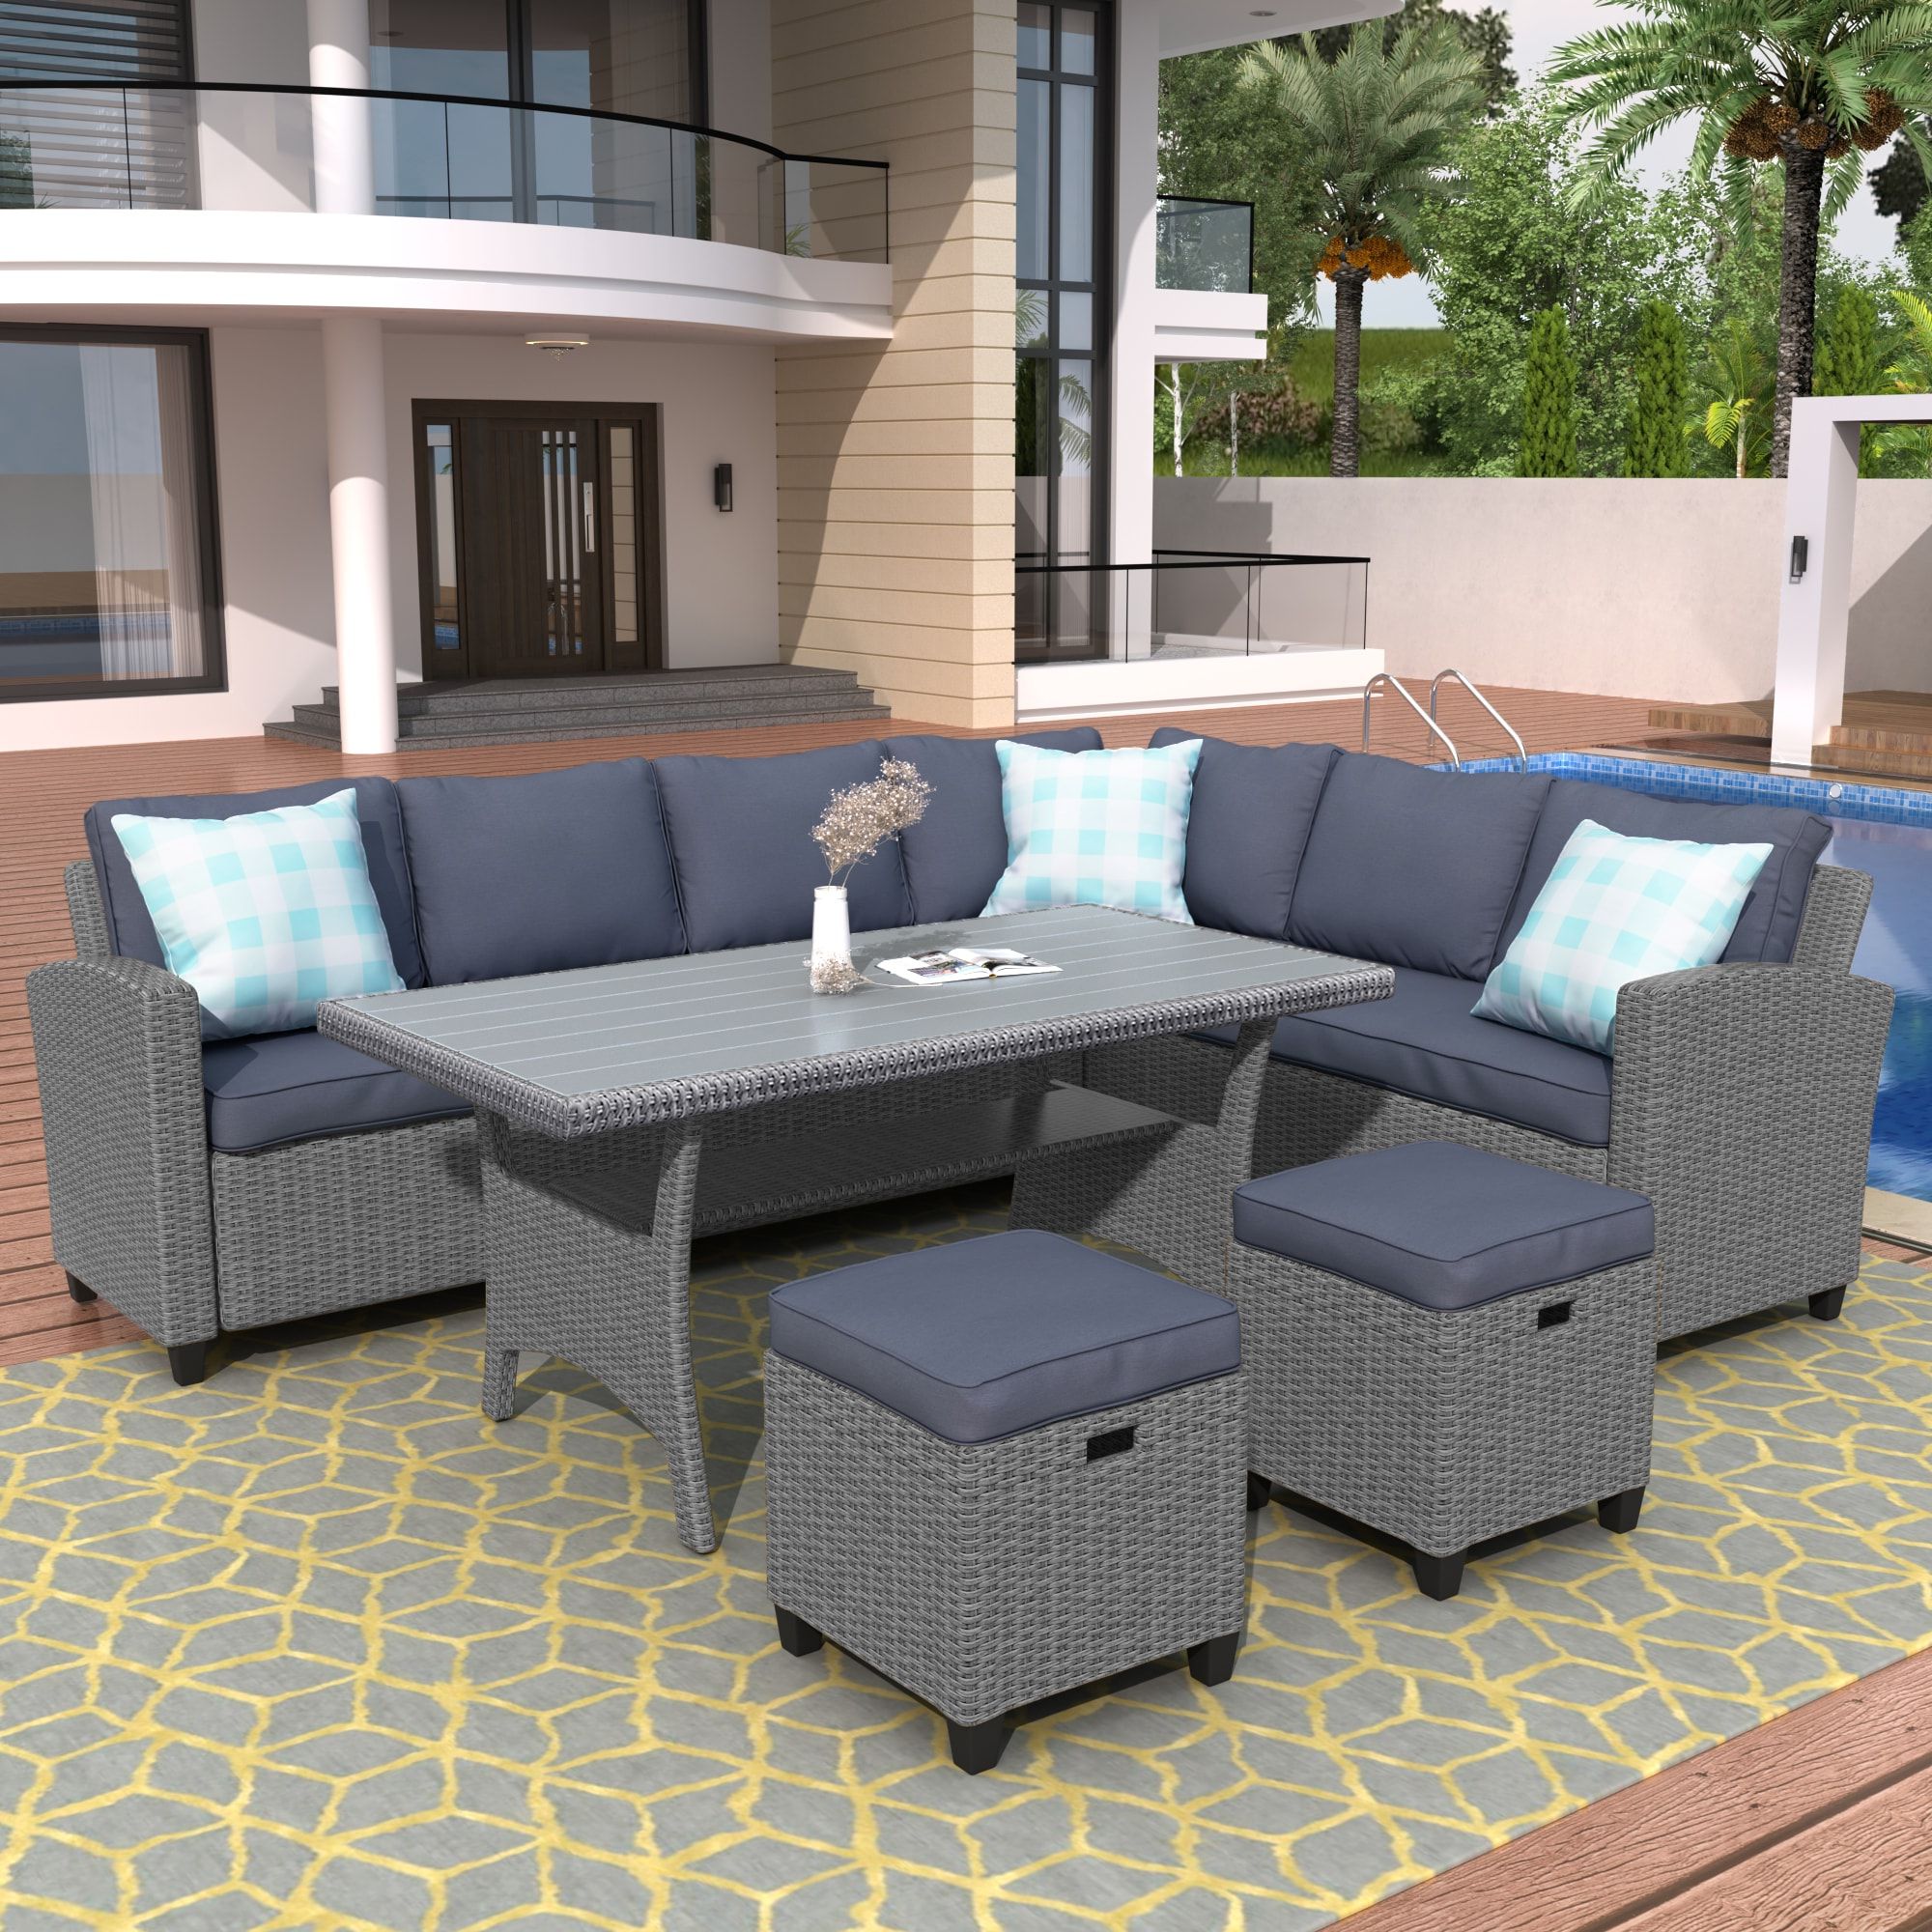 Most Recent Wellfor Uc Wicker Outdoor Furniture 5 Piece Wicker Patio Conversation Set  With Gray Cushions In The Patio Conversation Sets Department At Lowes With Regard To 5 Piece Patio Conversation Set (View 13 of 15)